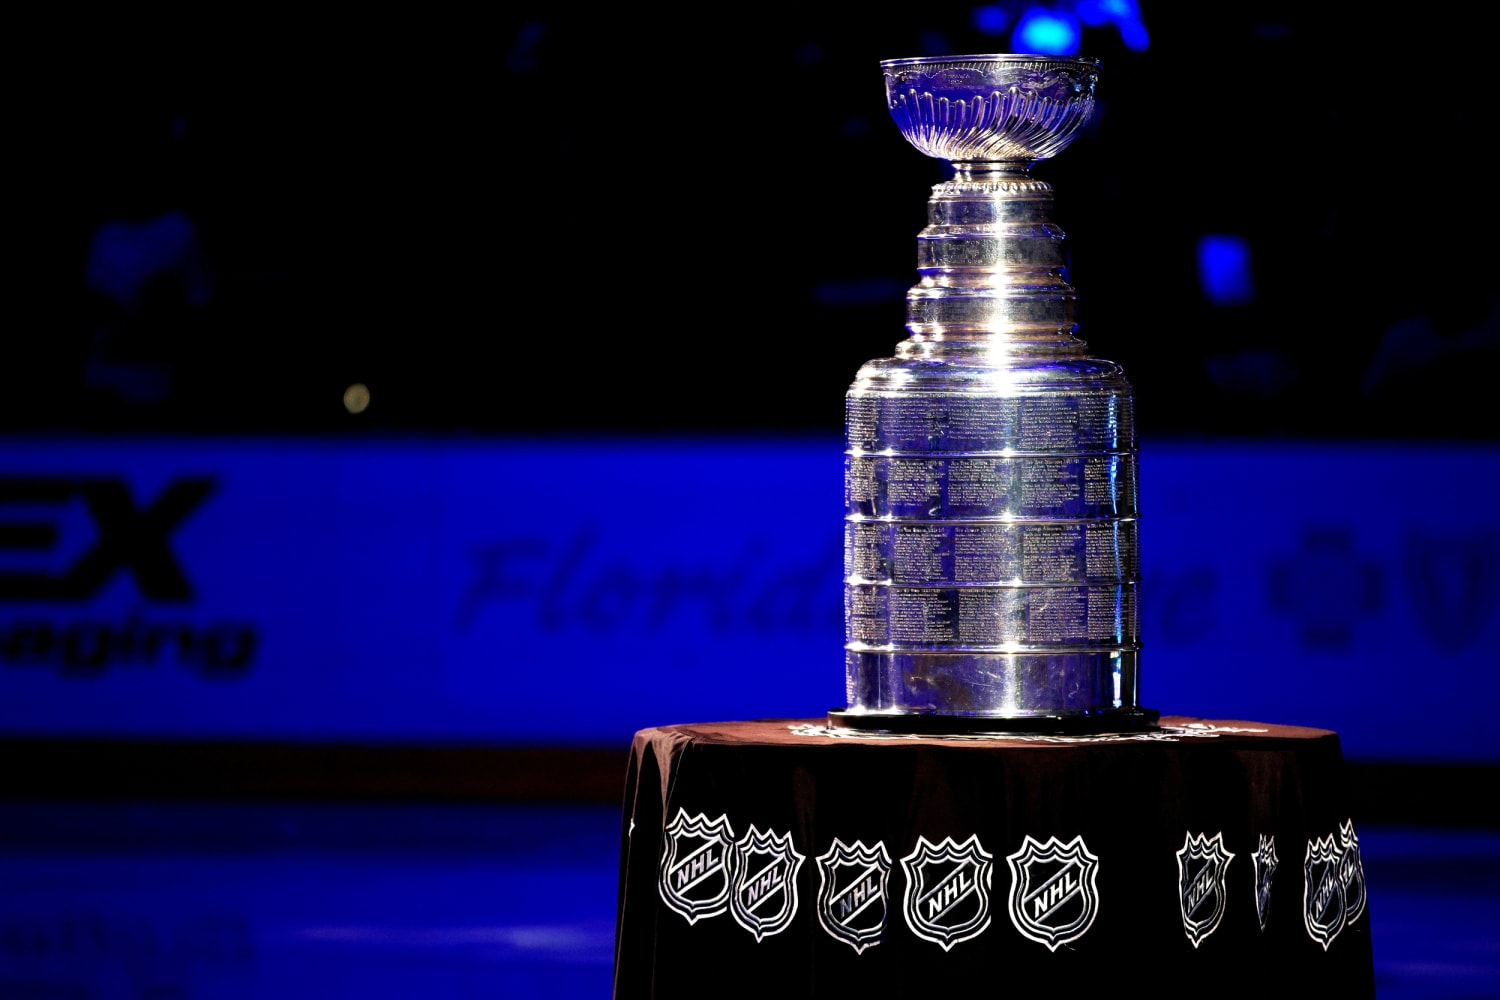 Ex-Blackhawks coach’s name covered up on Stanley Cup